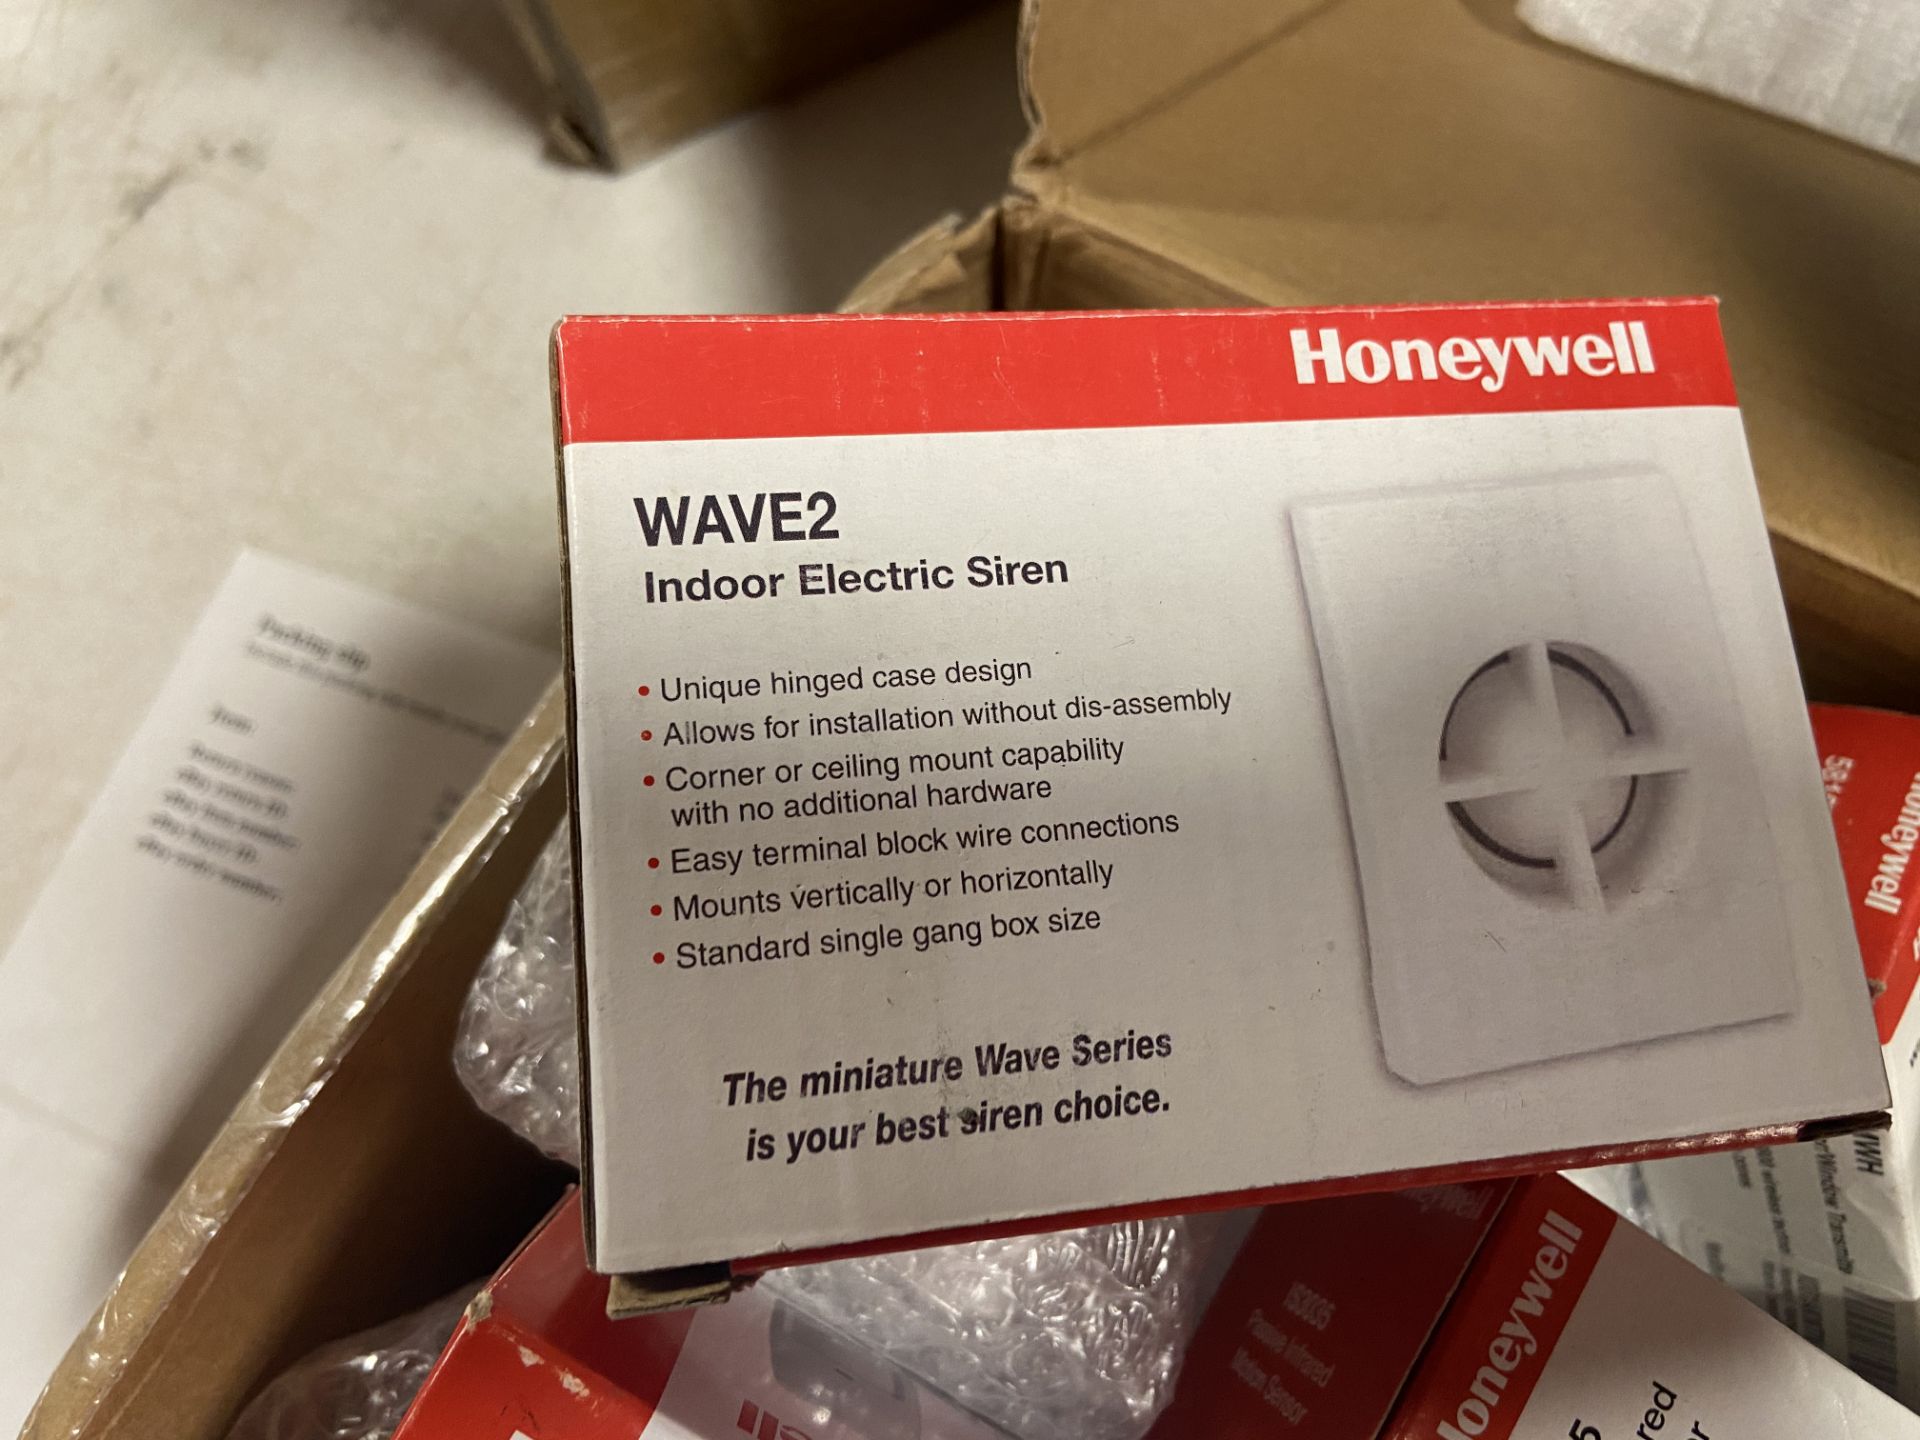 Miscellaneous Honeywell Security Products and Ethernet Surge Protectors (All Pictured), Rigging Fee: - Image 3 of 8